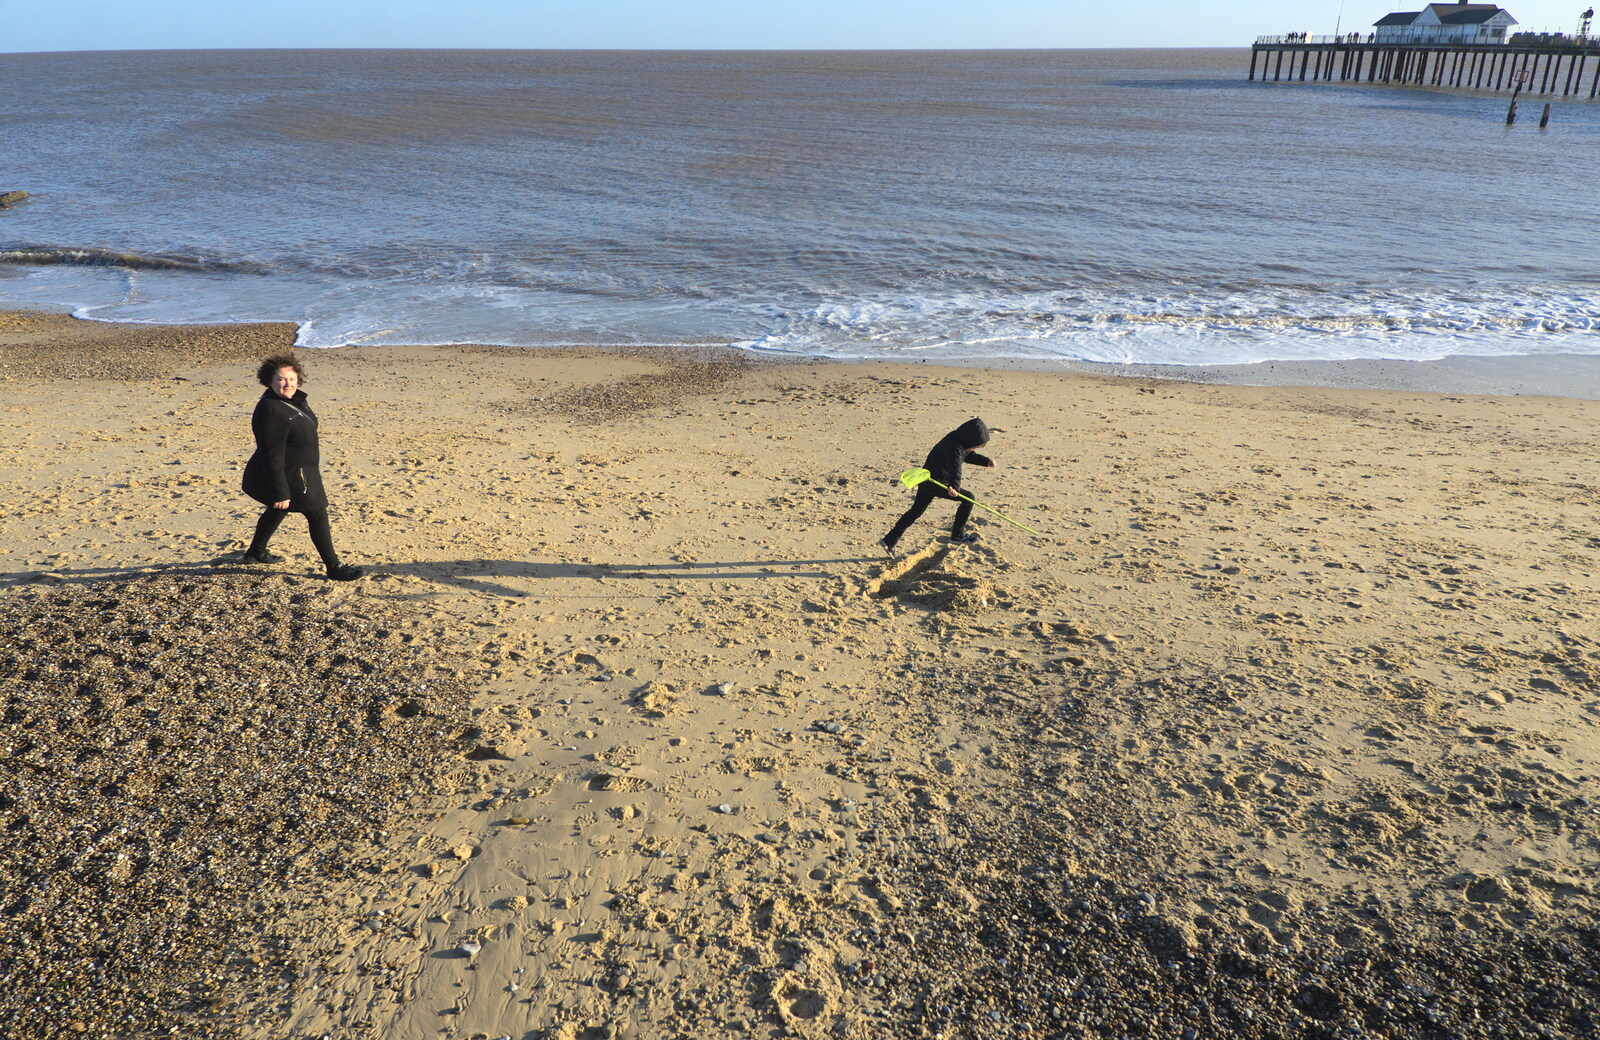 Lousie and Fred on the beach from Boxing Day in Southwold, Suffolk - 26th December 2016